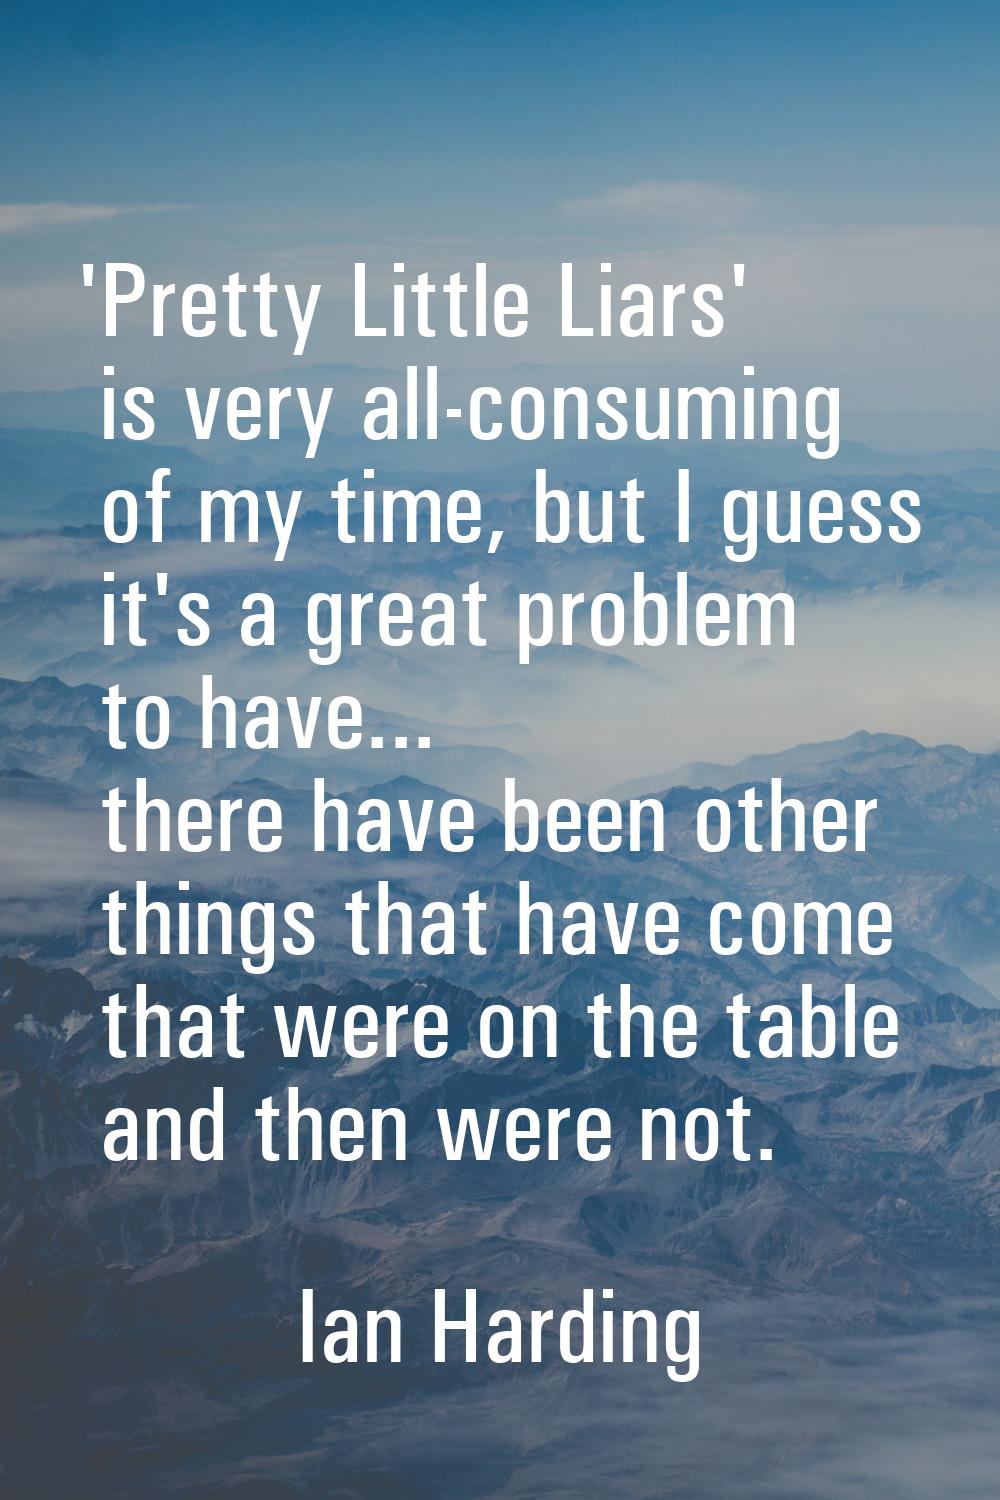 'Pretty Little Liars' is very all-consuming of my time, but I guess it's a great problem to have...